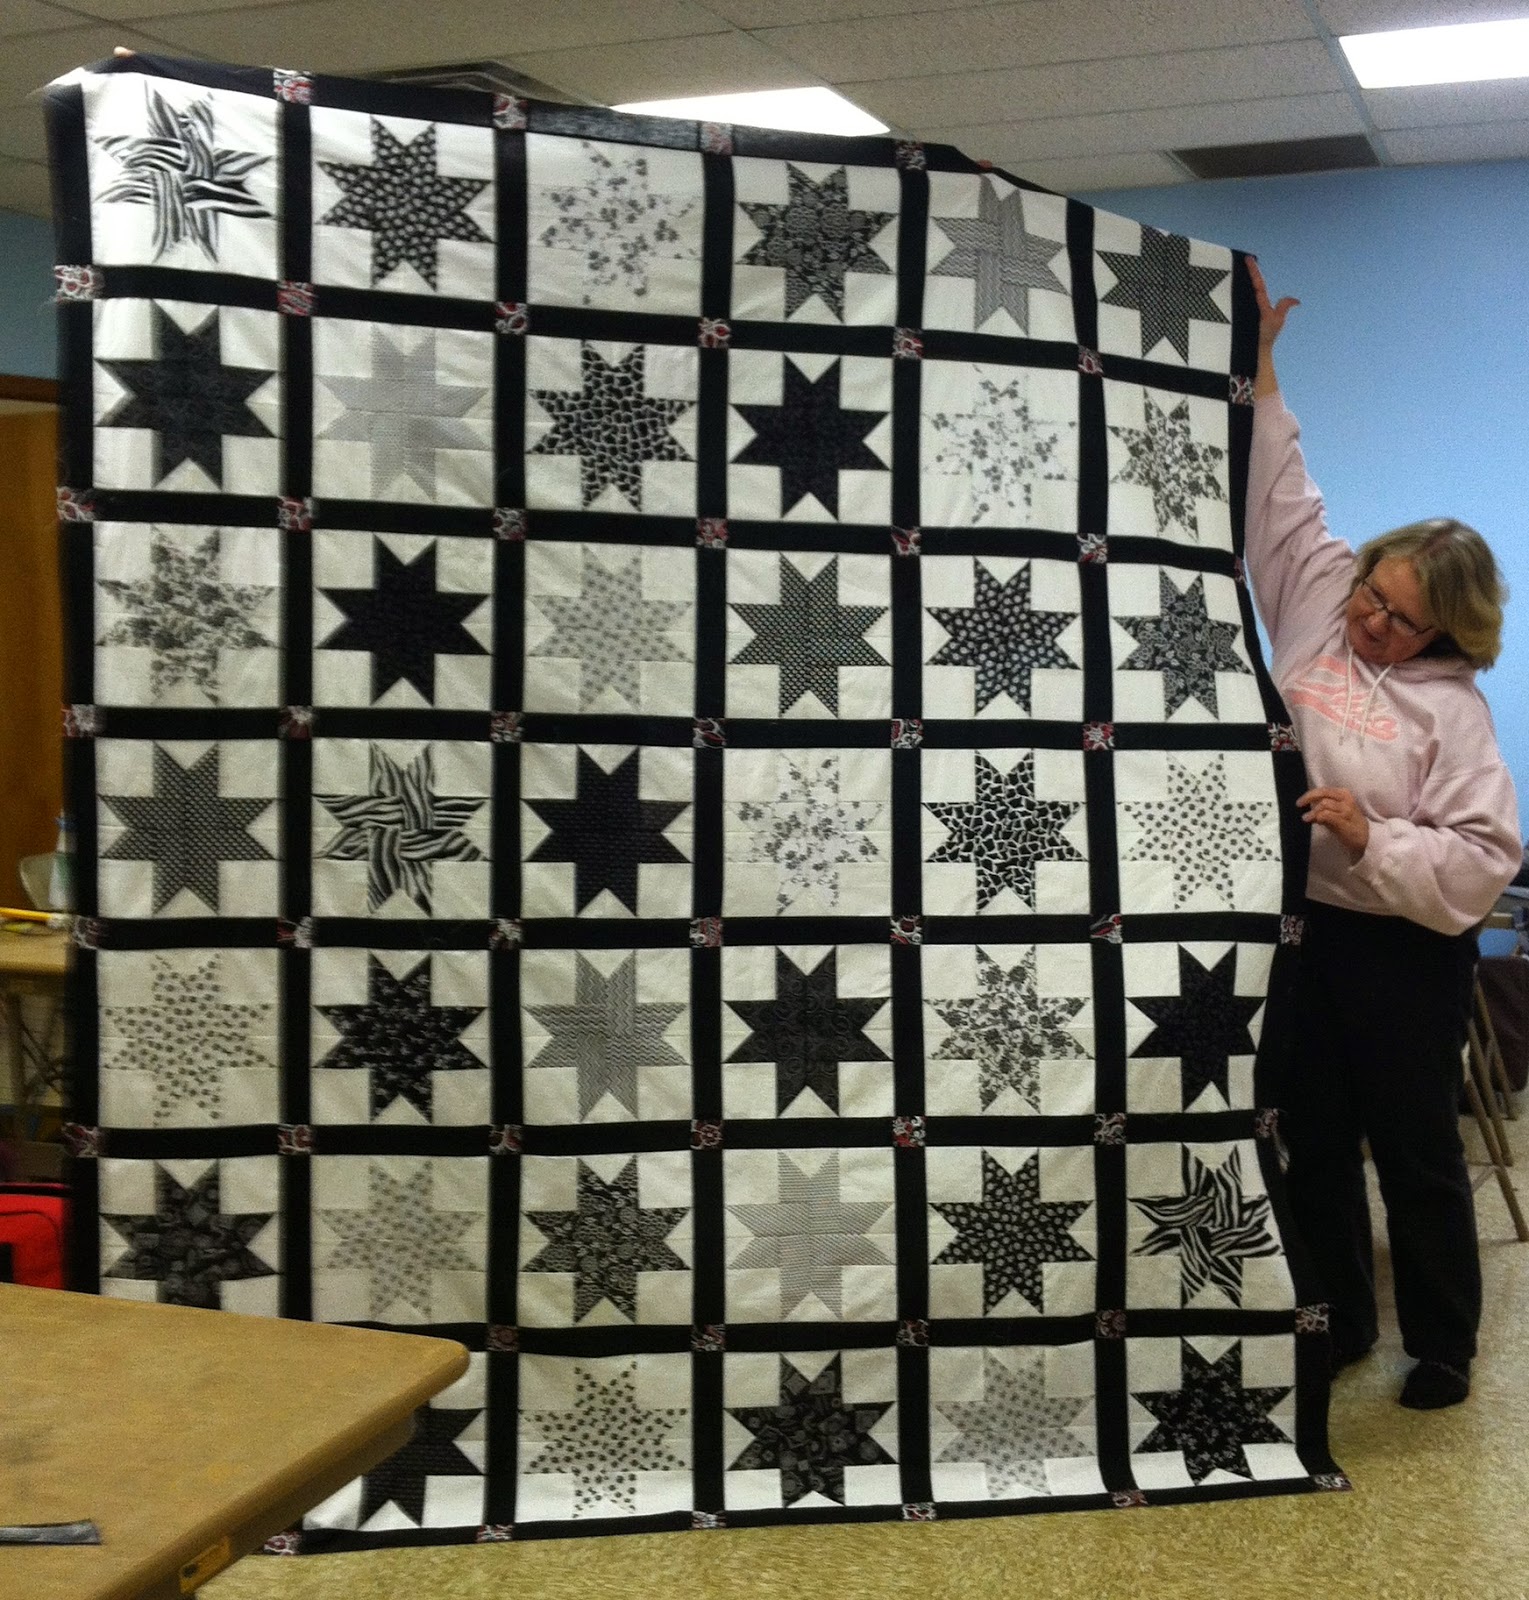 Scrappy Star Quilt, Black and White Quilt, Sashing and Cornerstones